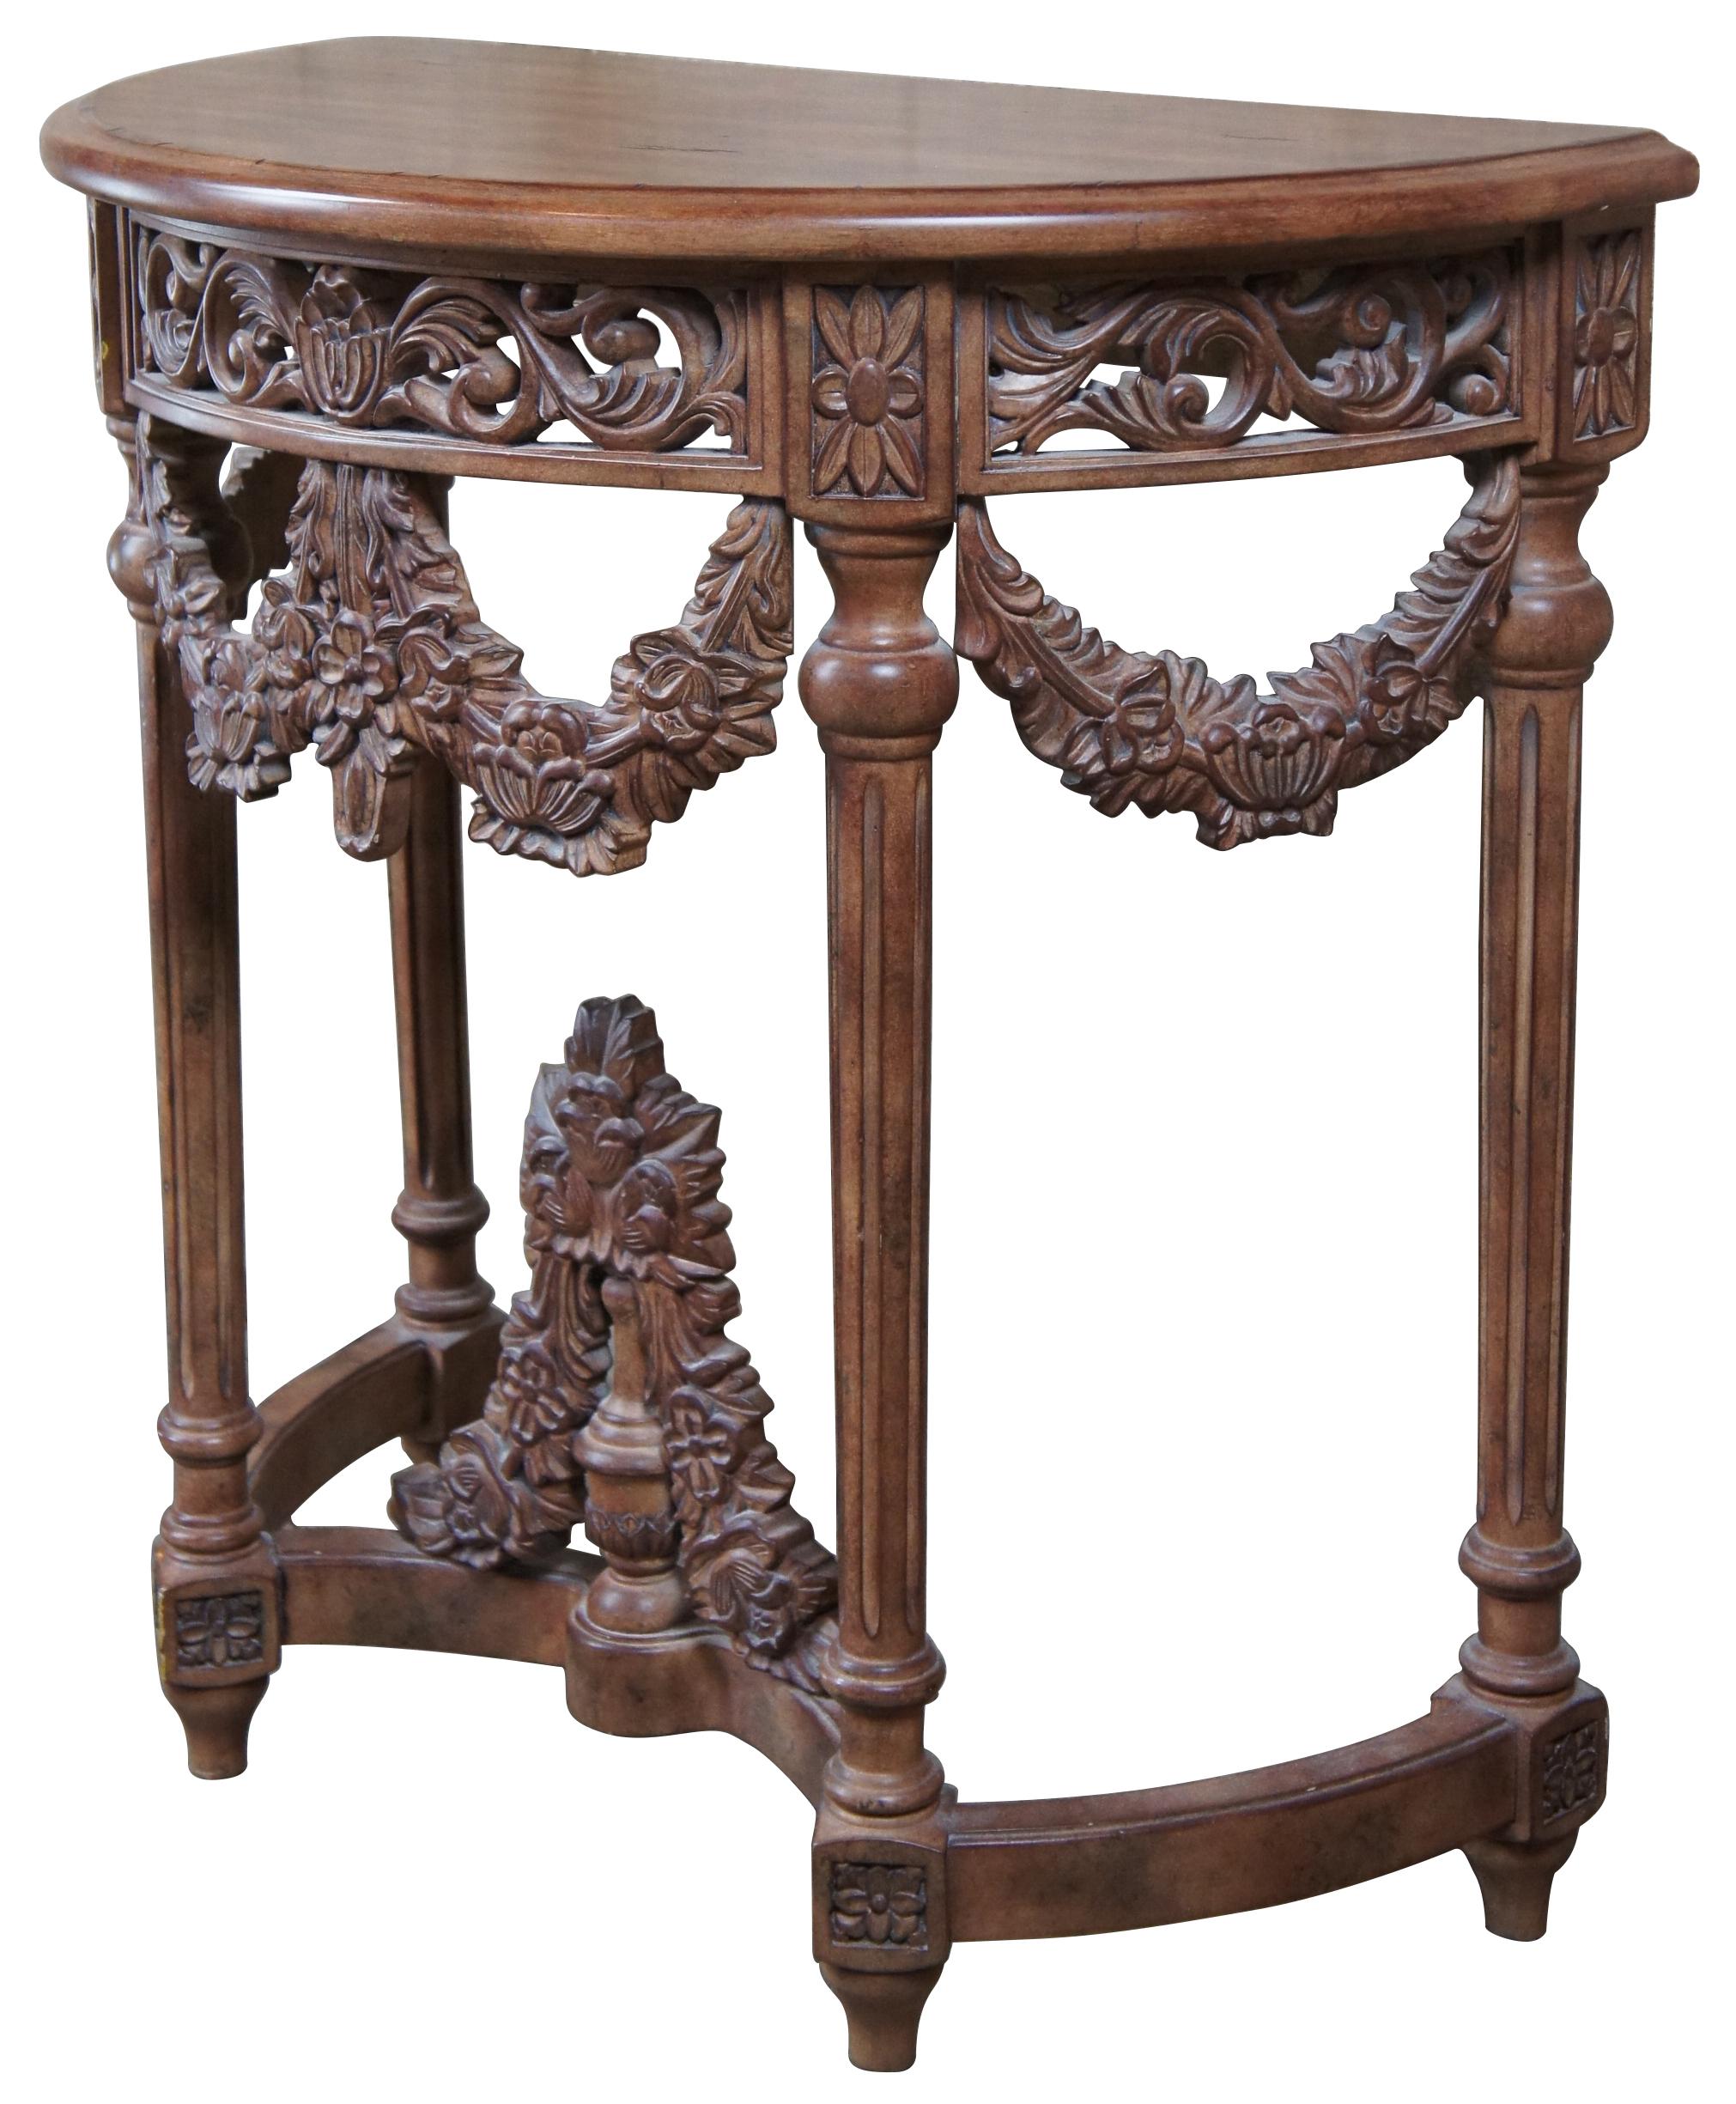 20th century neoclassical Revival console or hall table. Features a demilune shape with a distressed walnut finish. Ornately designed with a pierced apron and floral drapery between fluted columns leading to a trestle style base with trophy finial